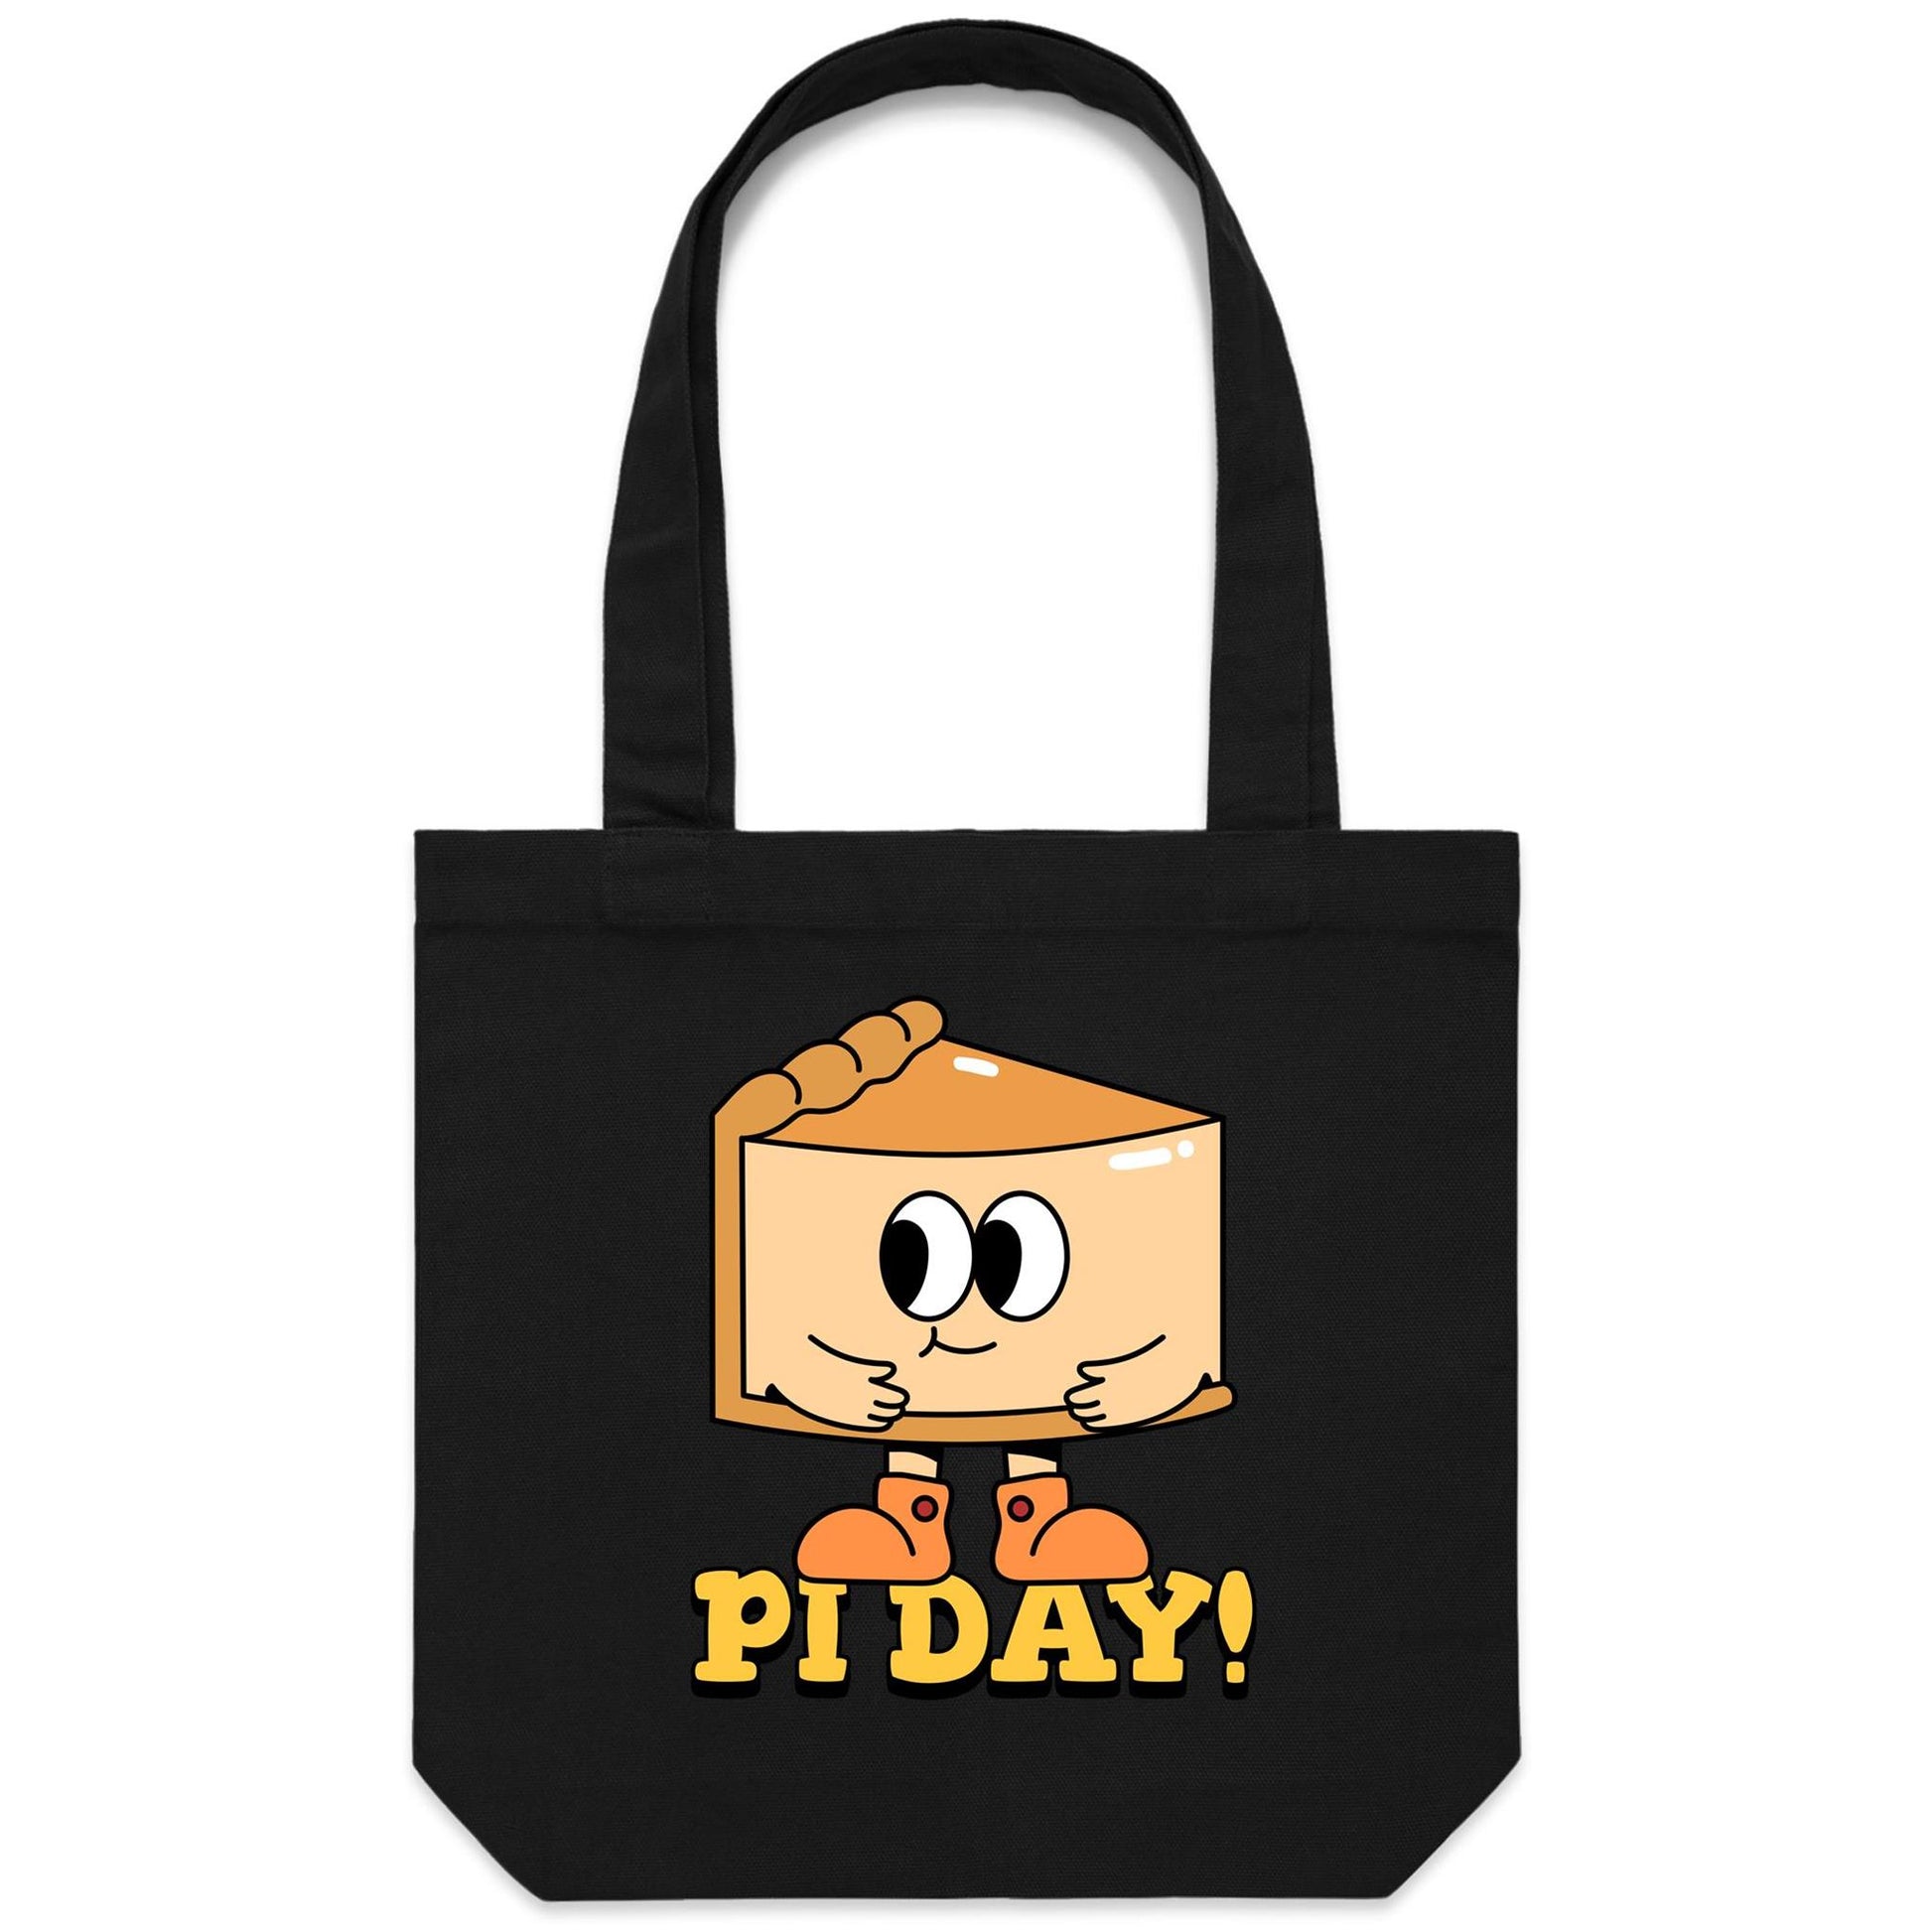 Pi Day - Canvas Tote Bag Black One Size Tote Bag Maths Science